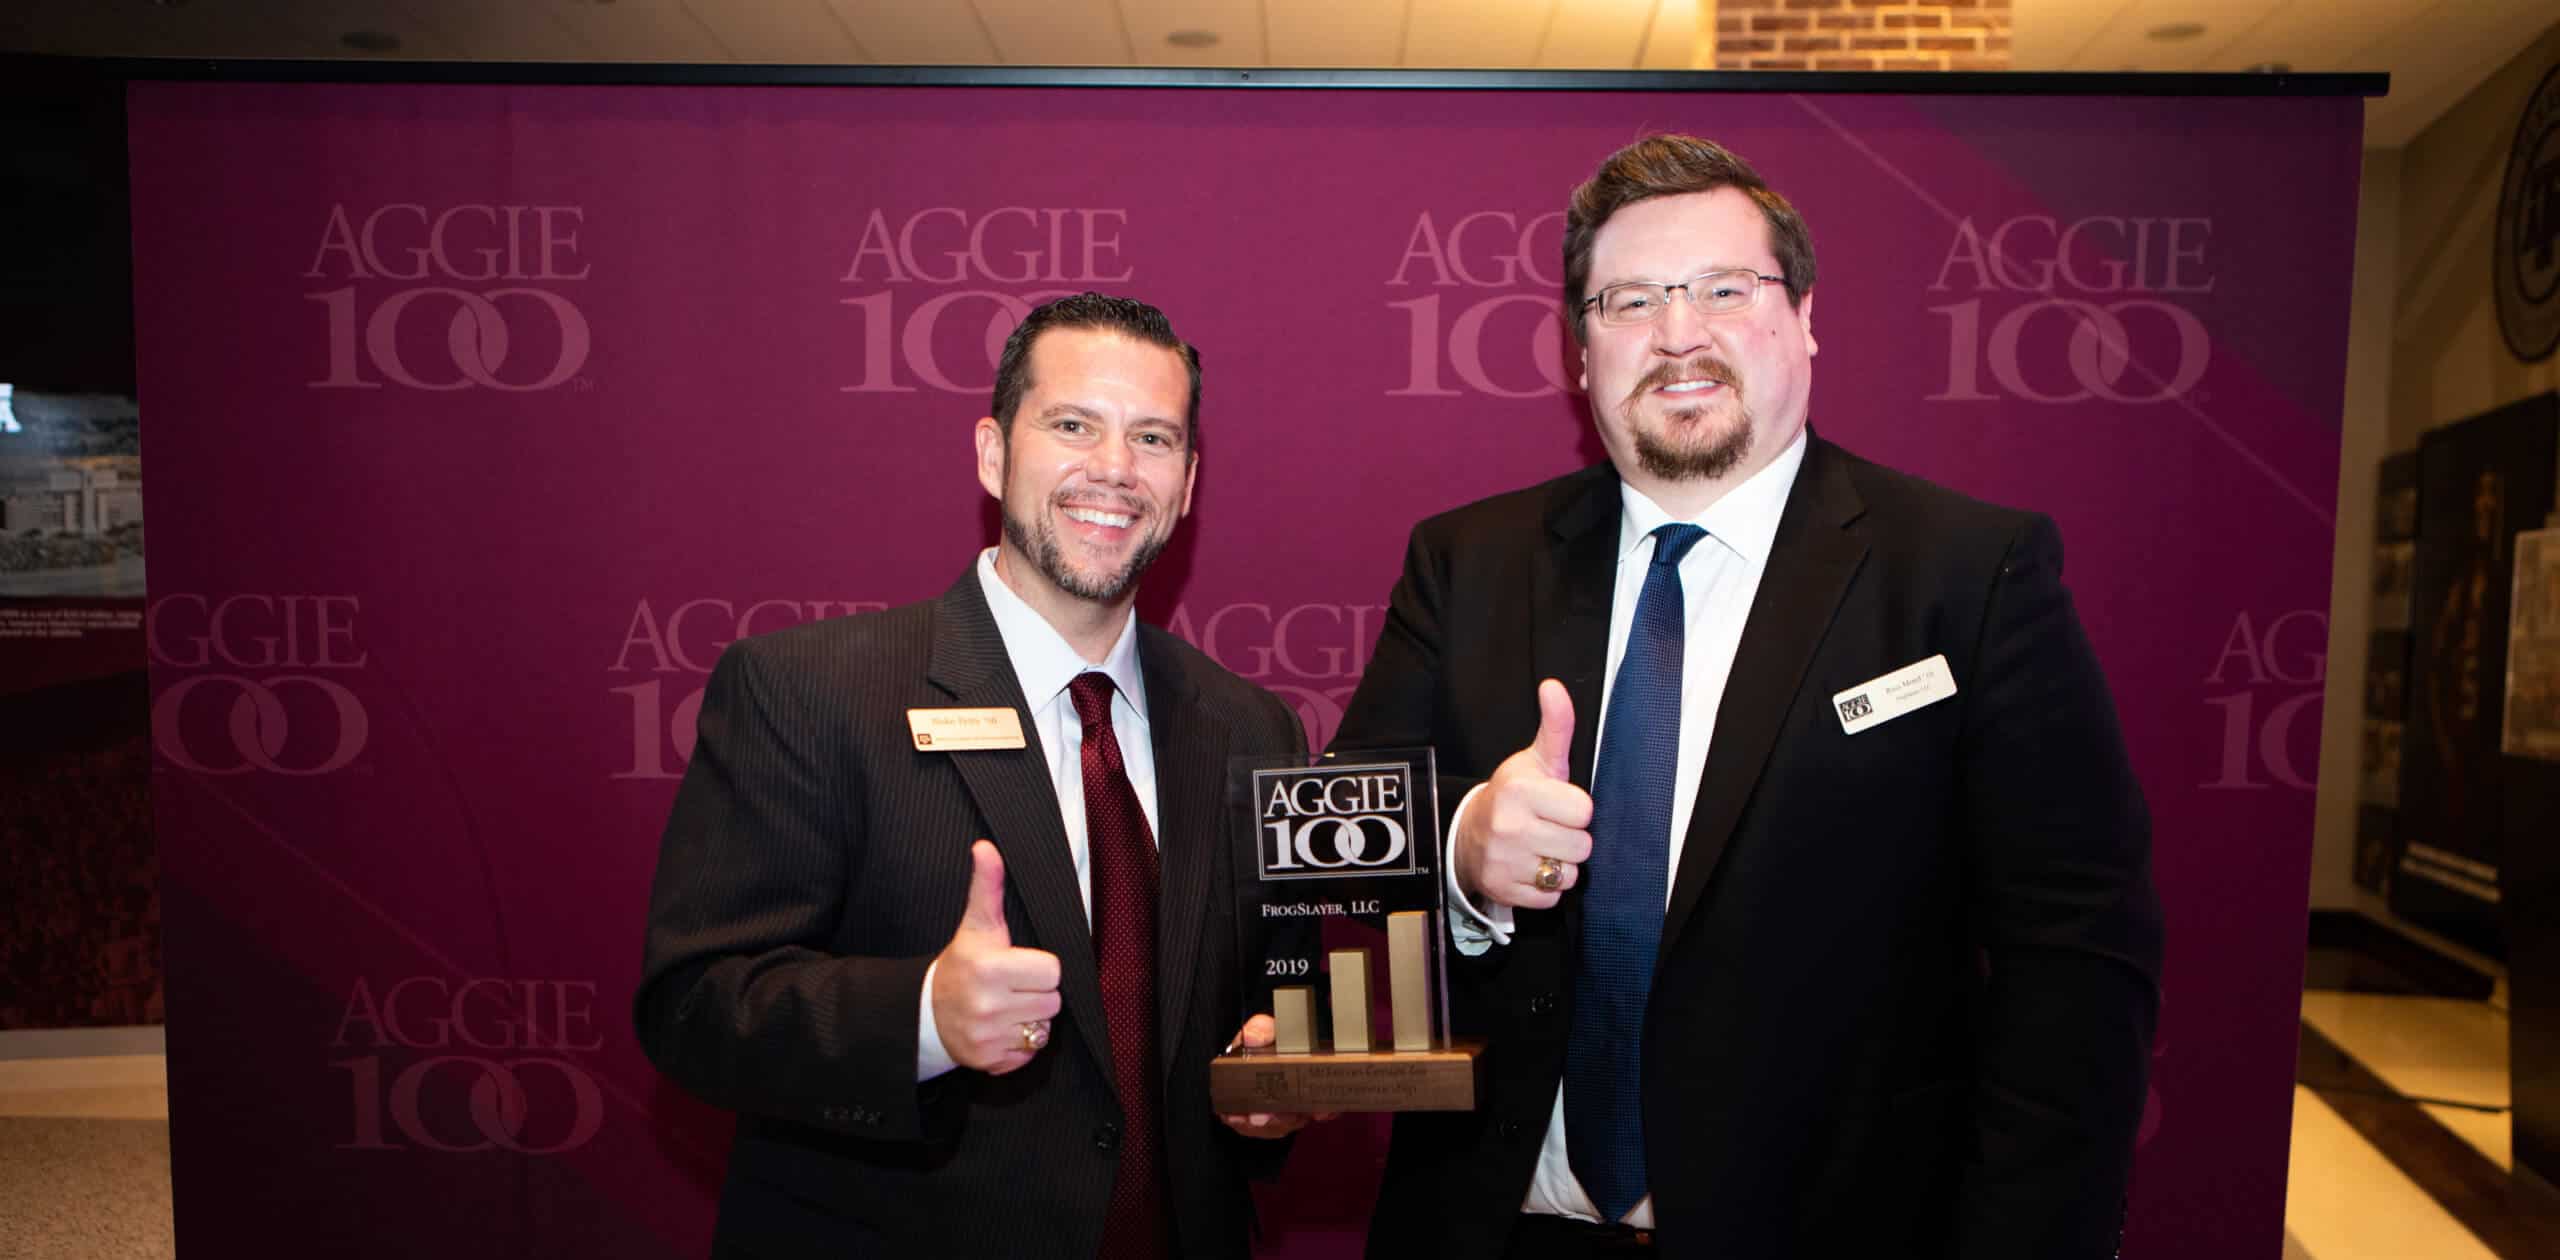 2019 Aggie 100 - Frogslayer CEO Ross Morel